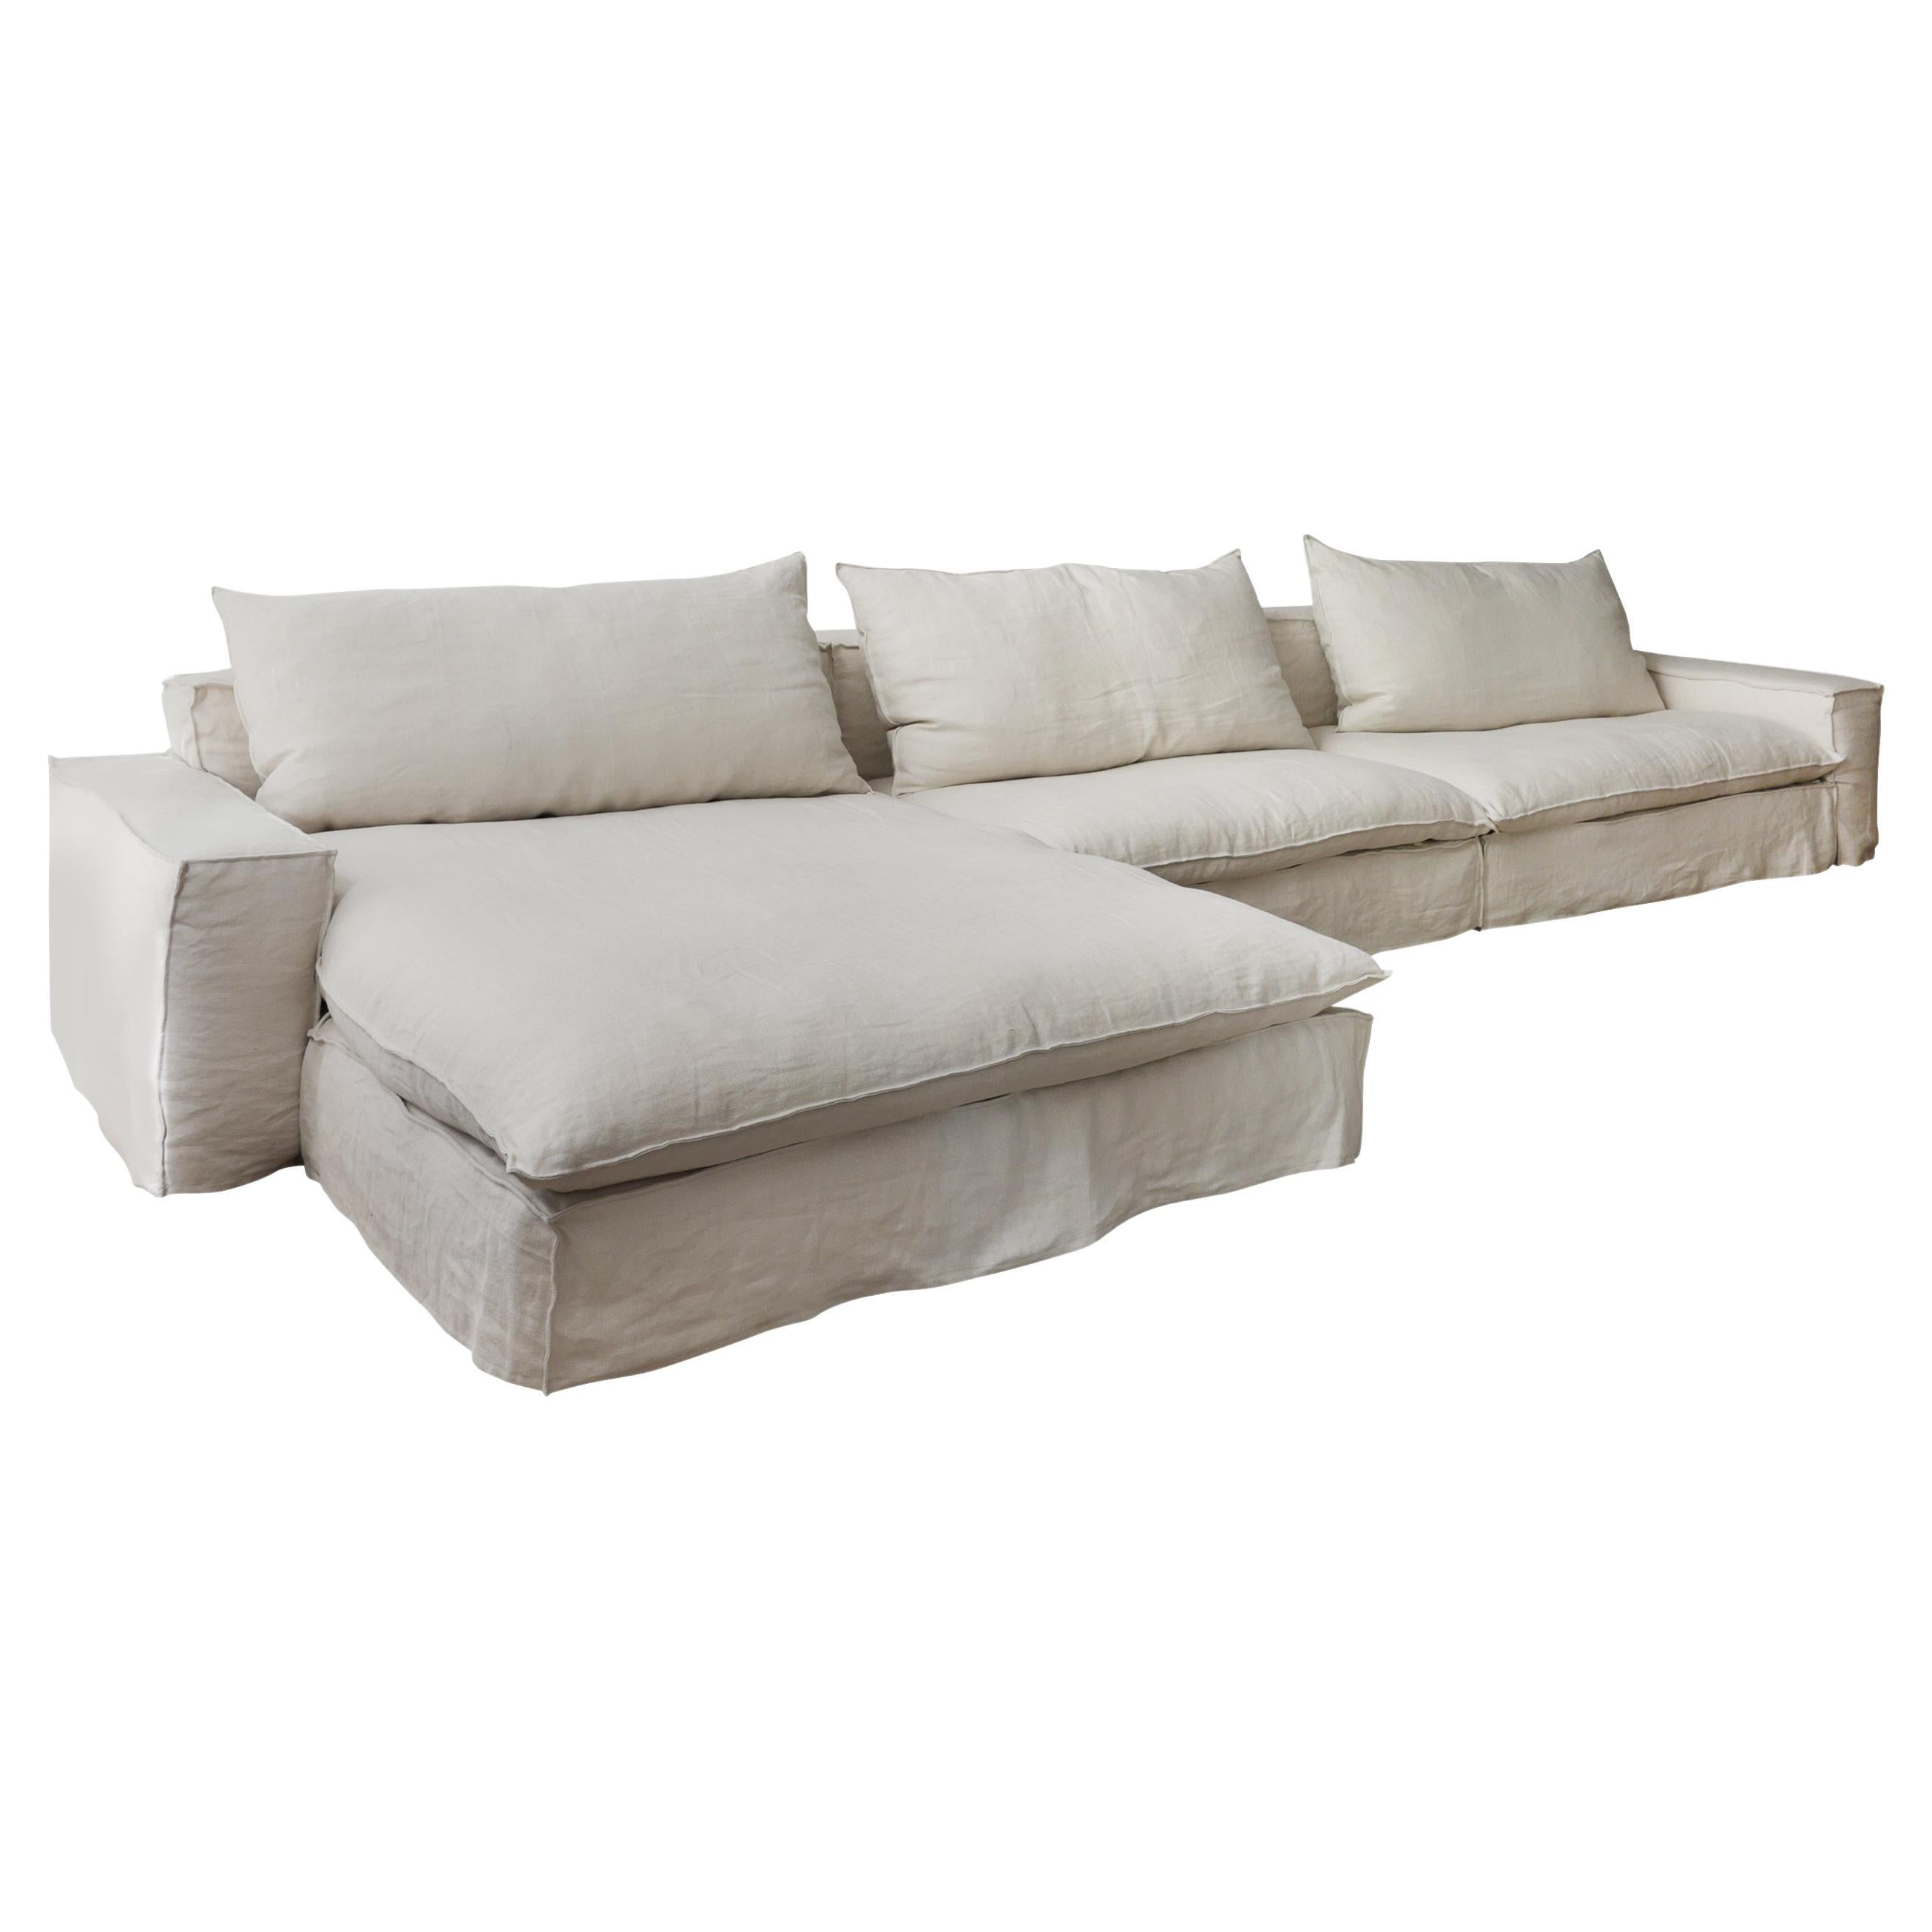 Pluma Sofa Set in Linen Color Fabric Upholstery For Sale at 1stDibs